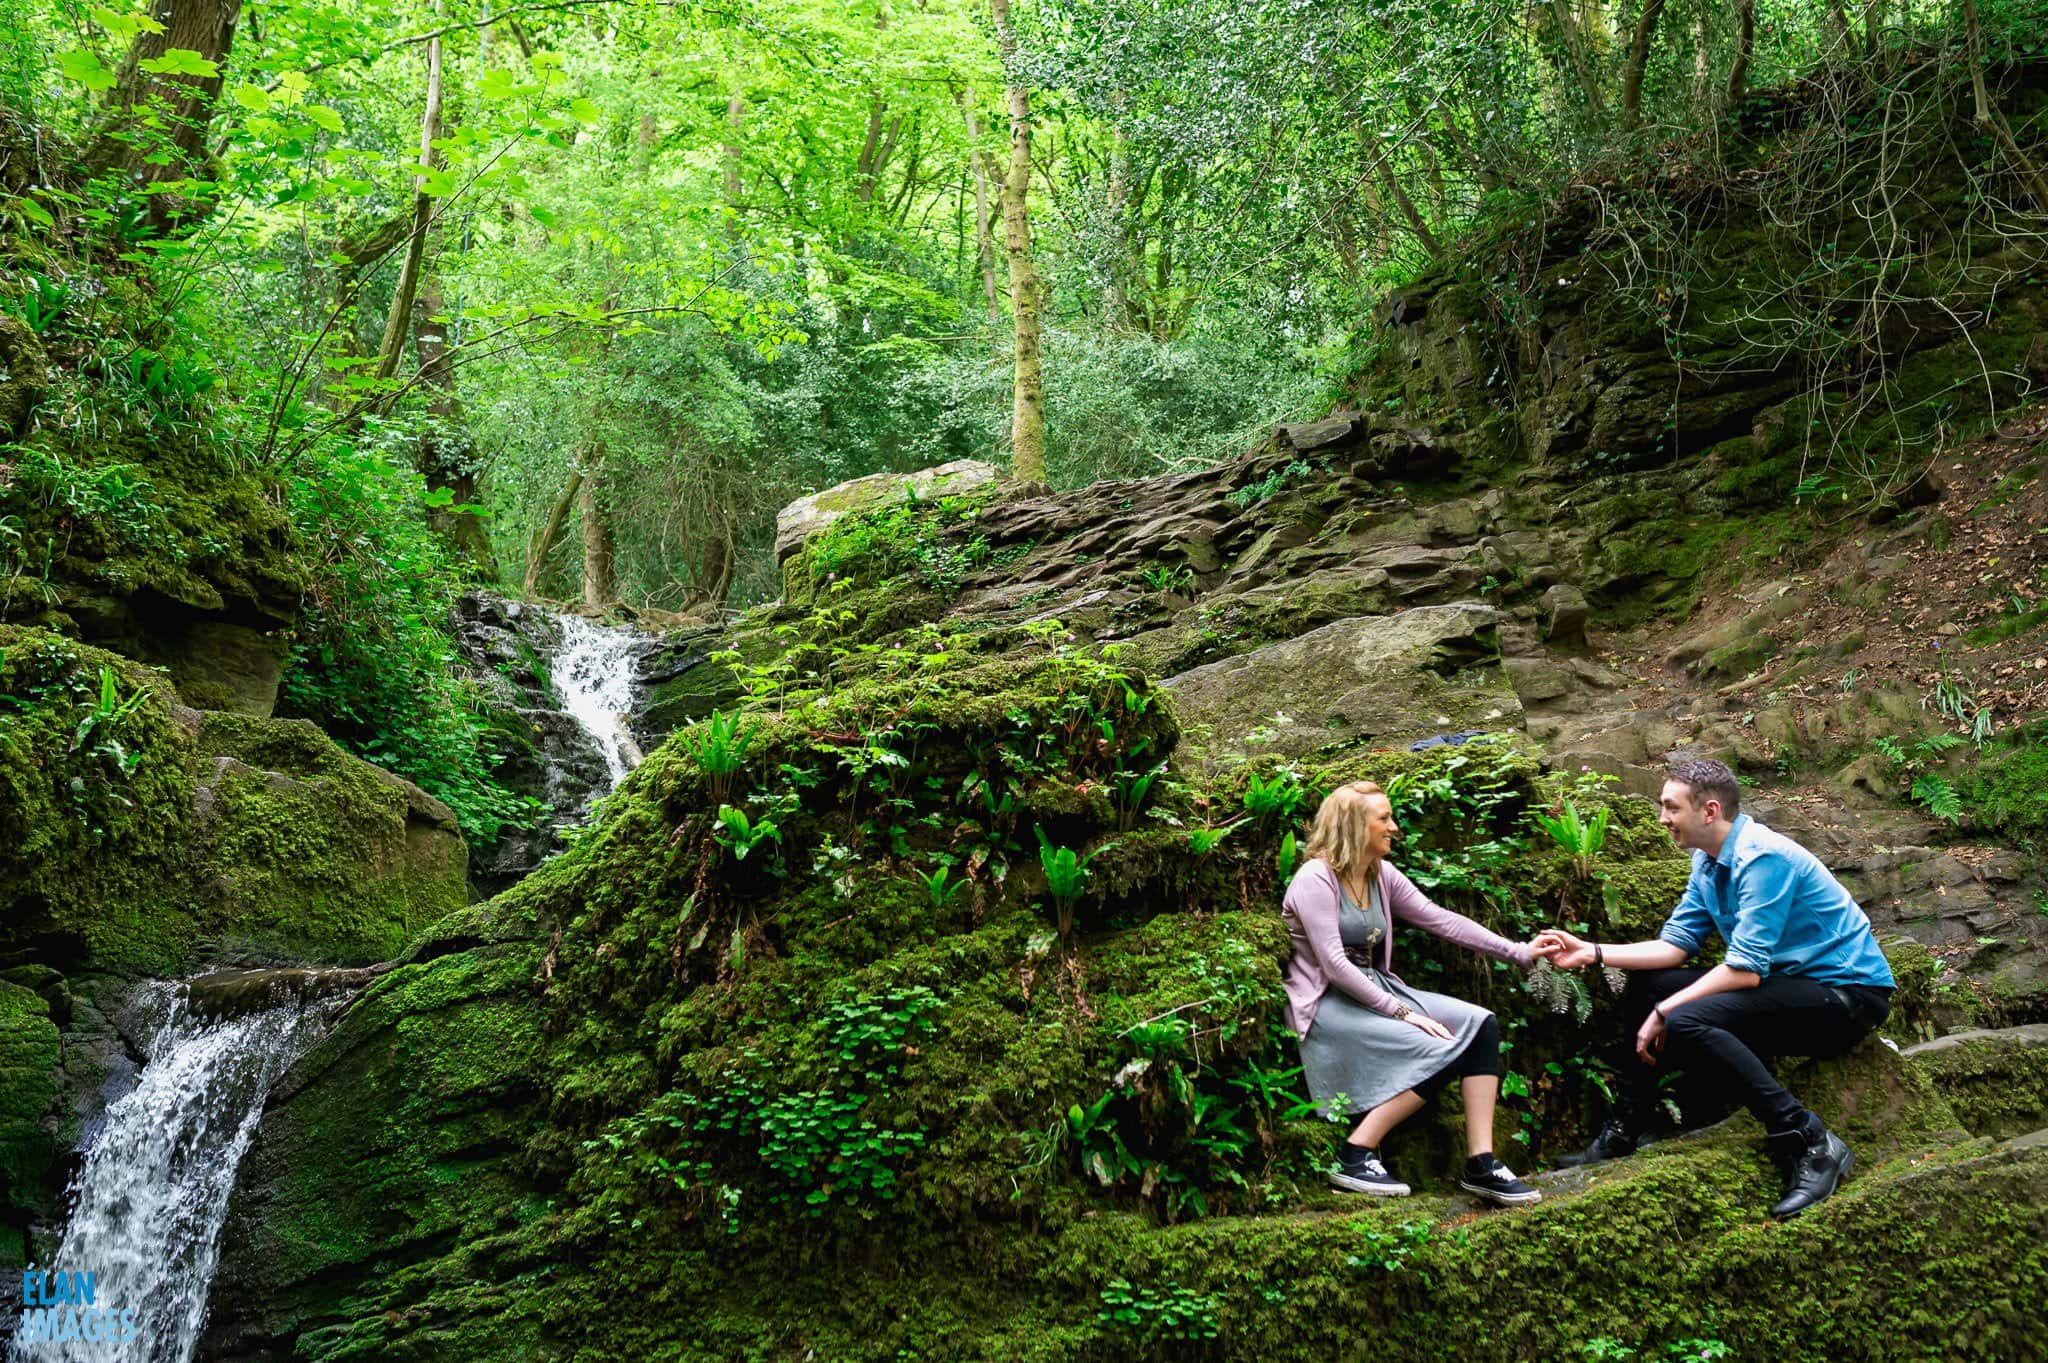 Engagement Photo Shoot in the Bluebell Woods near Bristol 56